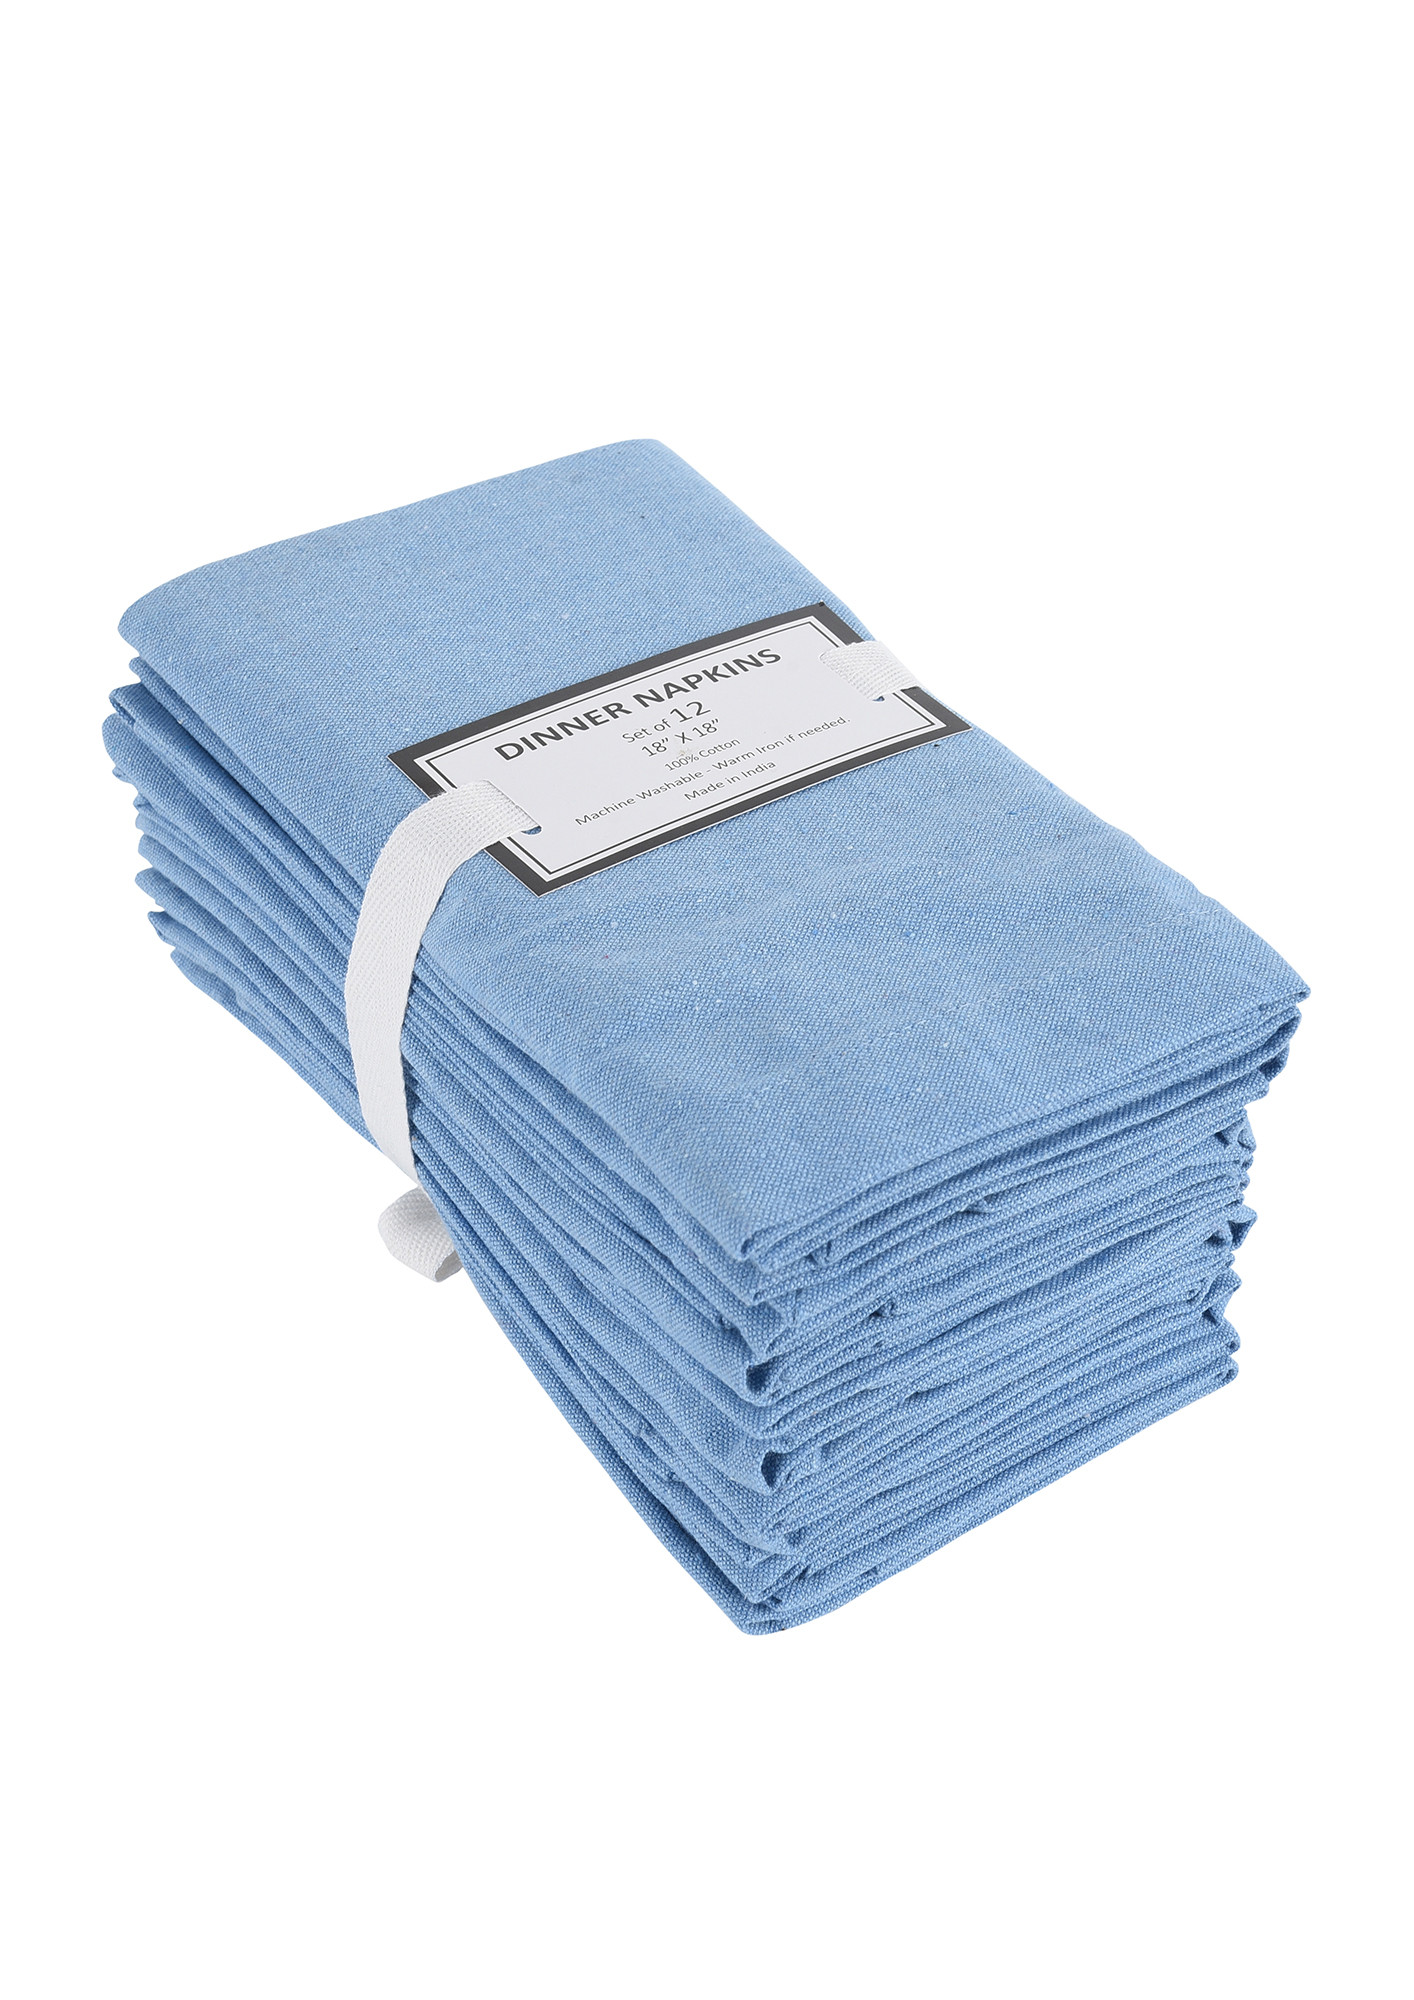 Aqua Cloth Napkins Dinner Washable Set of 12 in Cotton Linen Fabric Premium  Quality Soft Durable, Mitered Corners for Everyday Use Hotel Restaurant